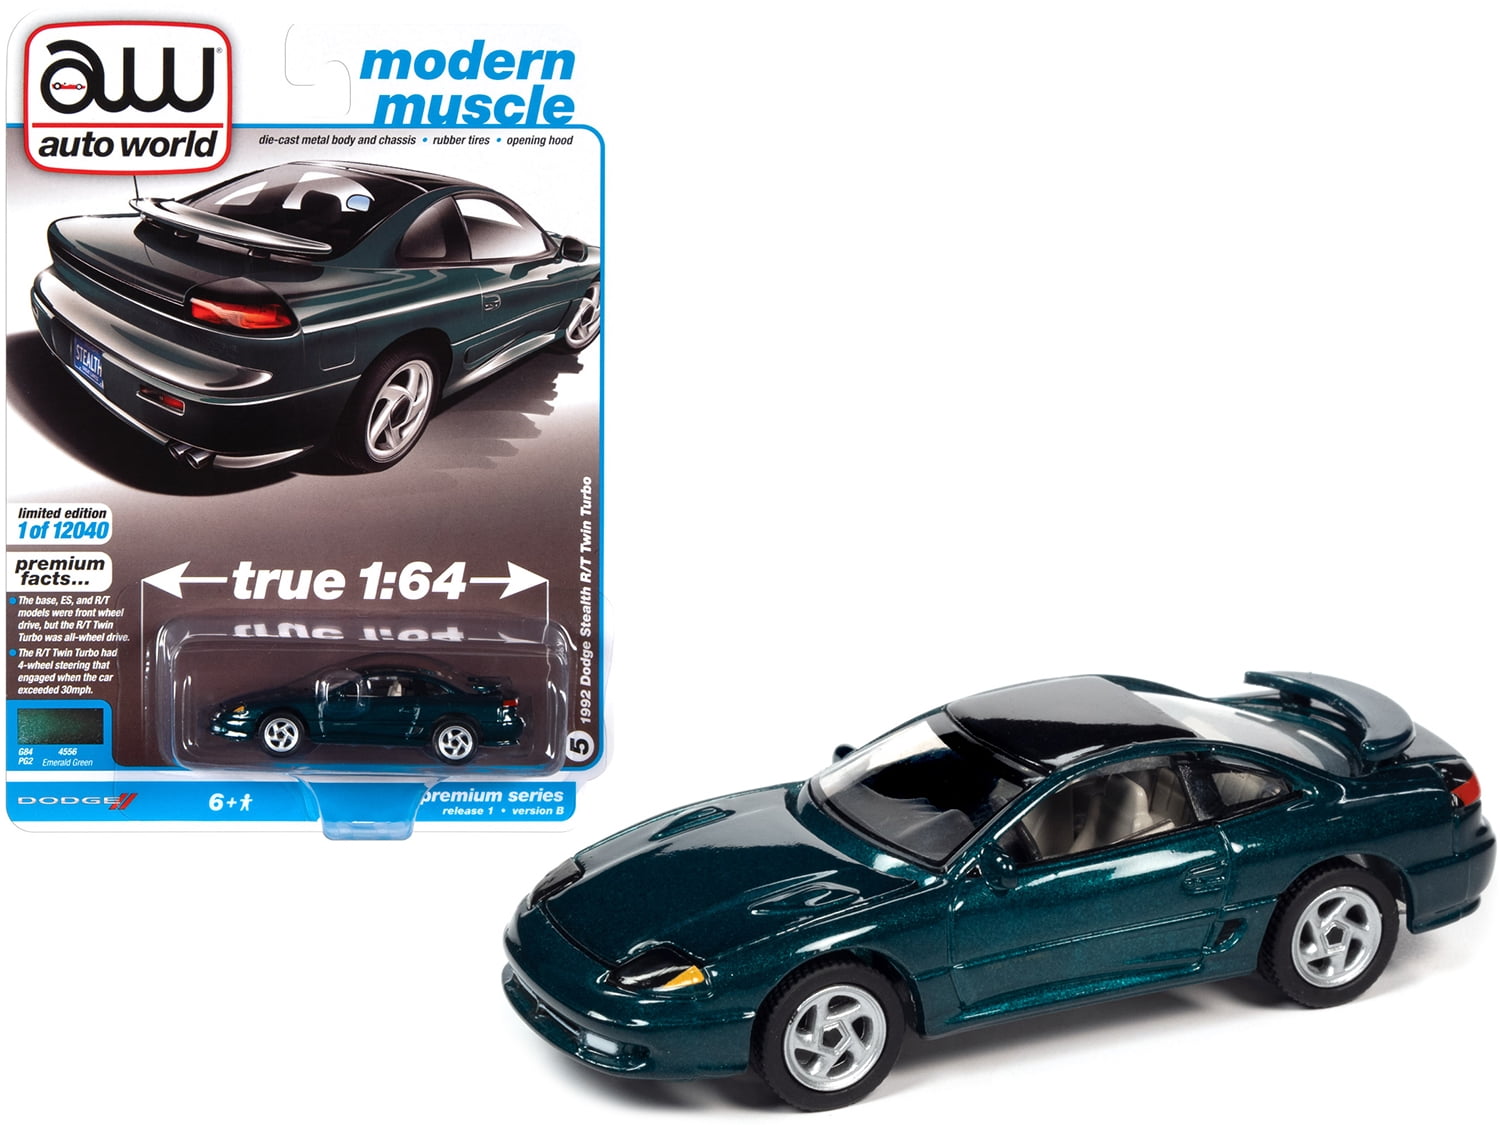 Picture of Autoworld 64302-AWSP063B Series 0.16 4 Diecast Model Car for 1992 Dodge Stealth R-T Twin Turbo Emerald Green Metallic with Black Top Modern Muscle Limited Edition To Worldwide - 12040 Pieces